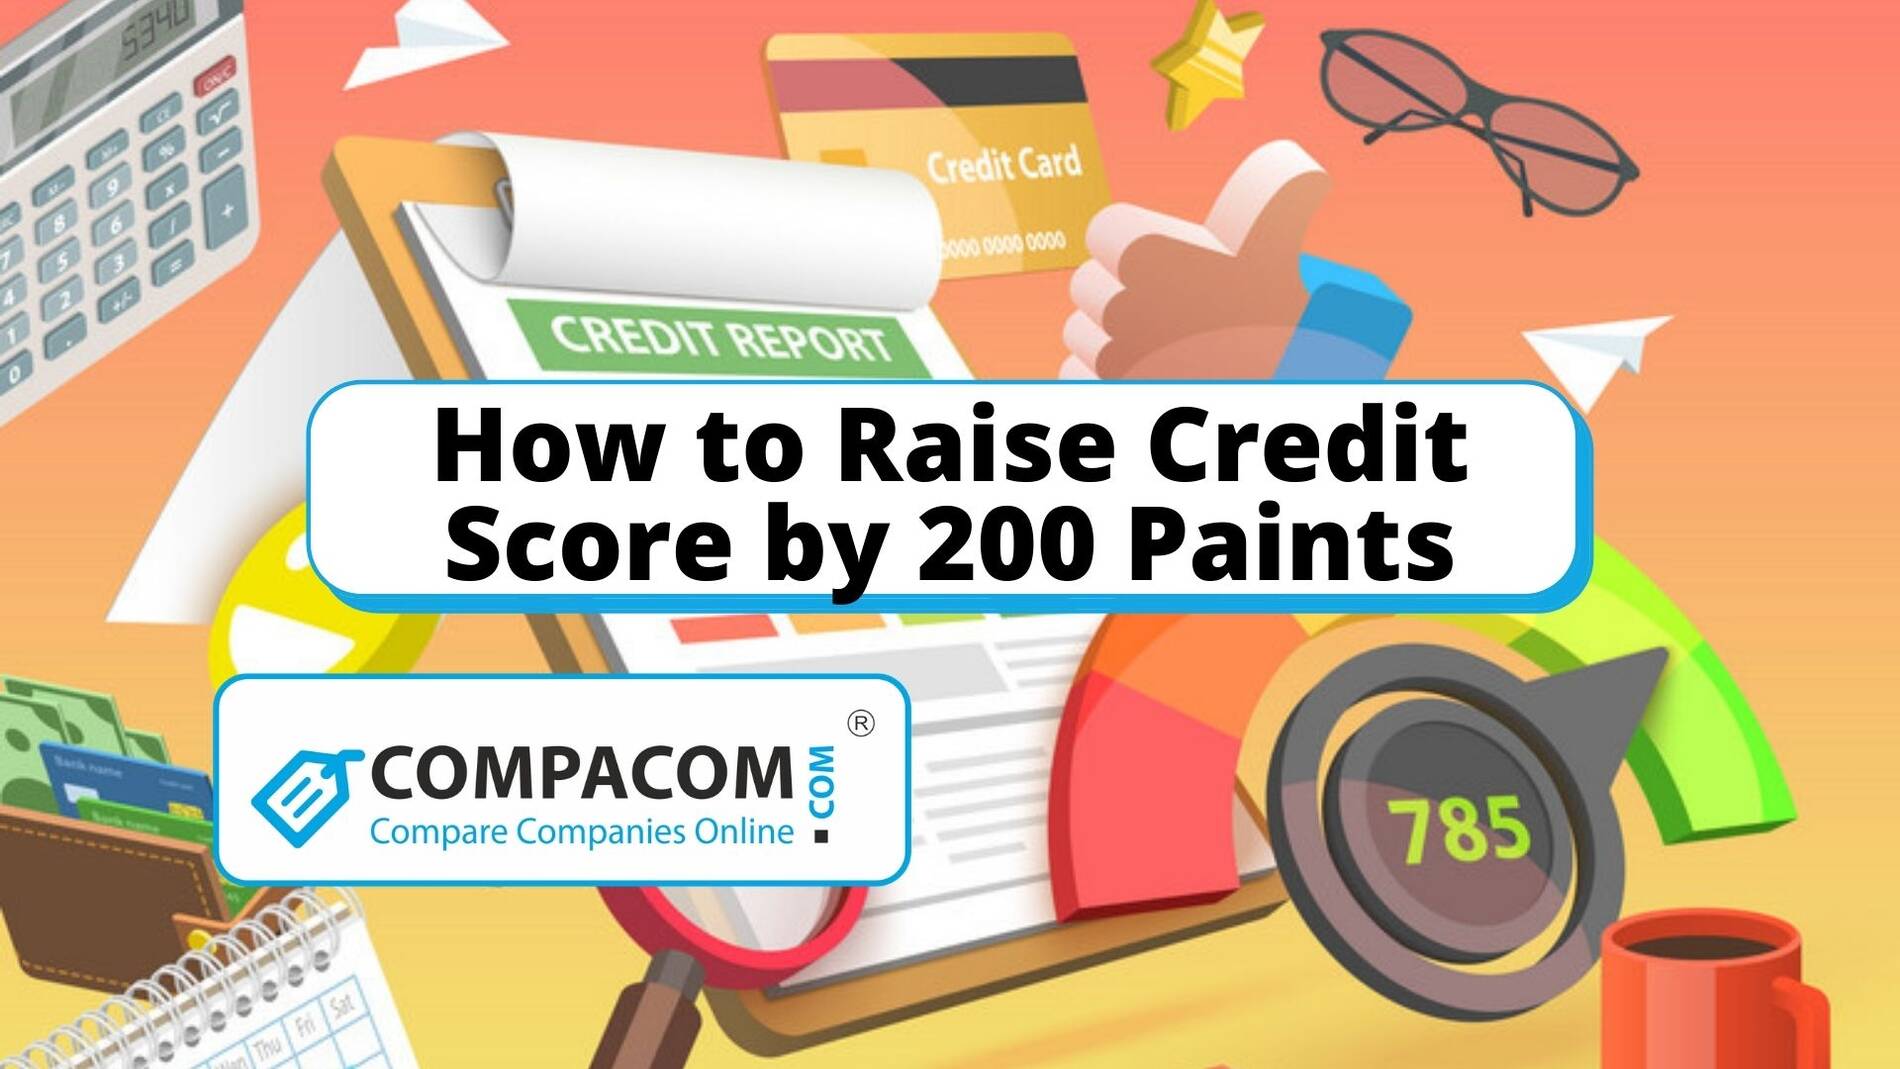 Use a few easy ideas to raise your credit score by 200 points overnight